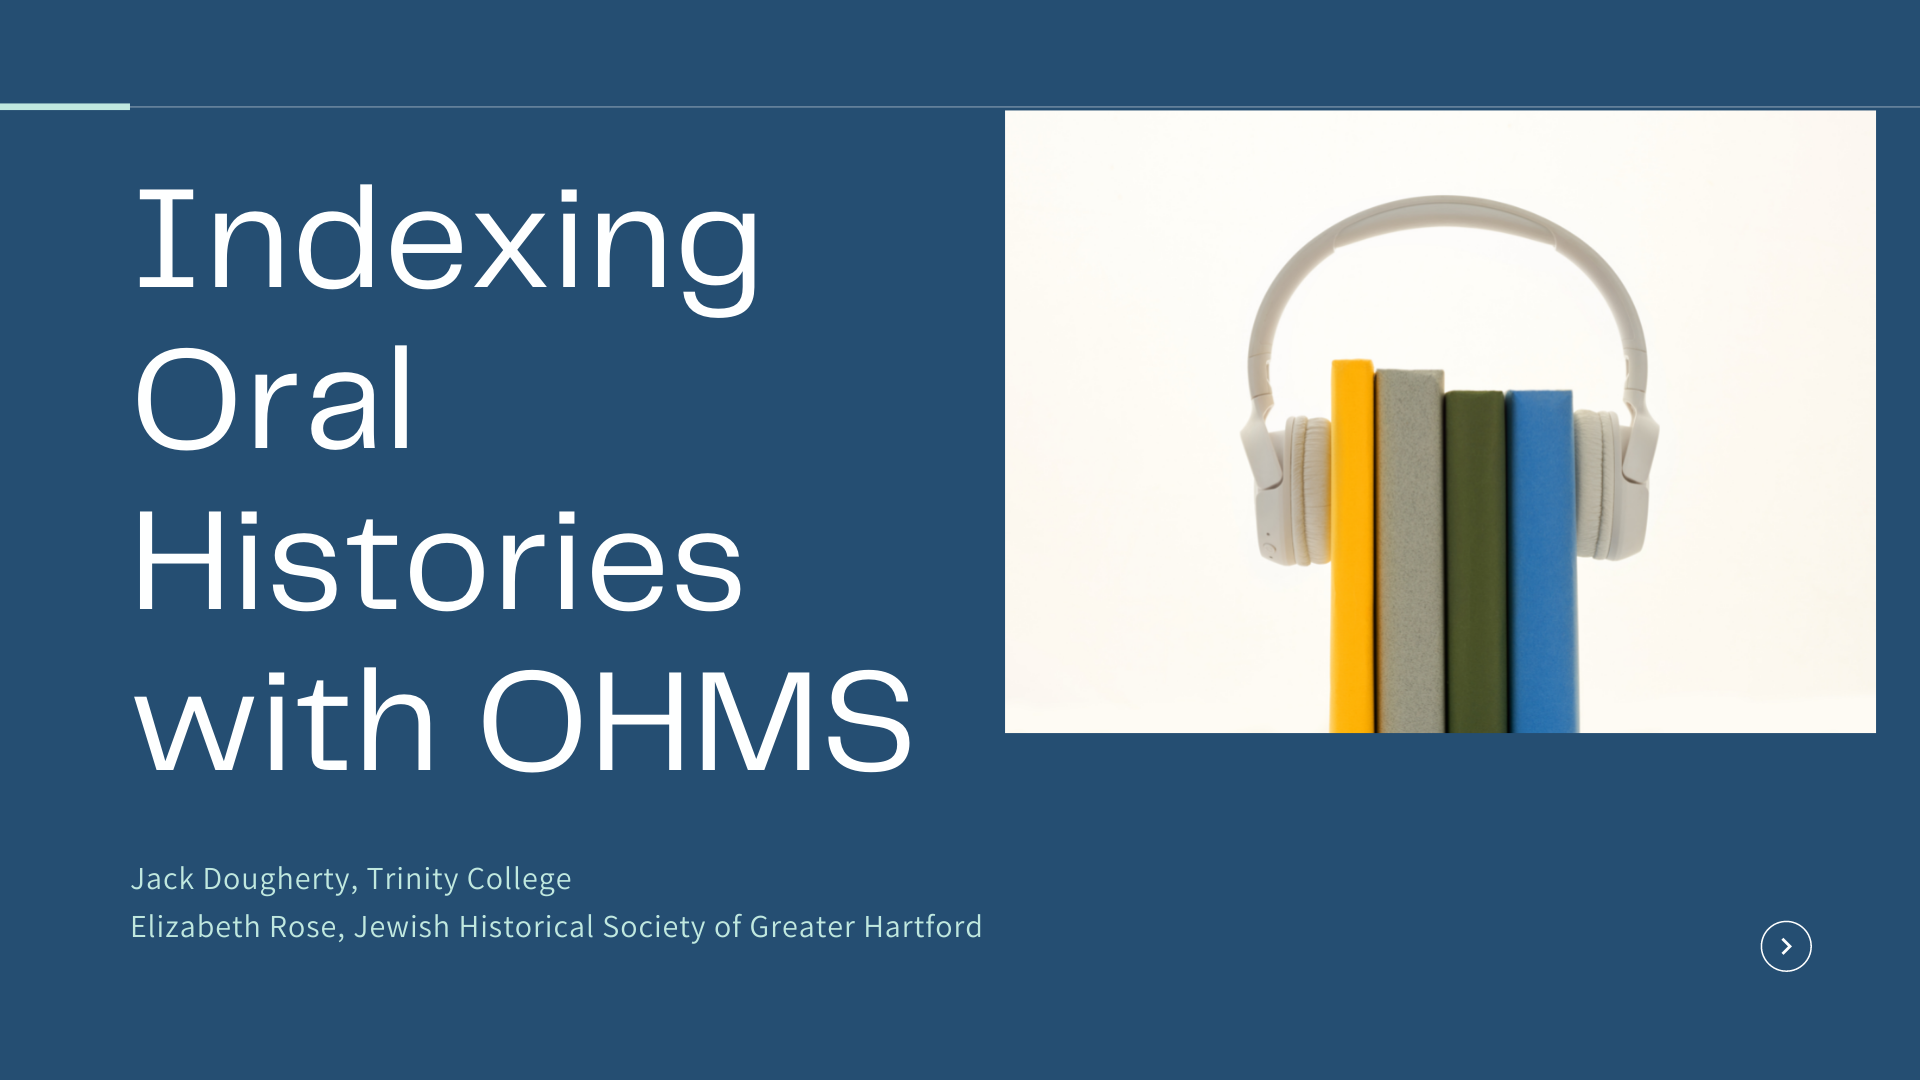 Indexing Oral Histories with OHMS